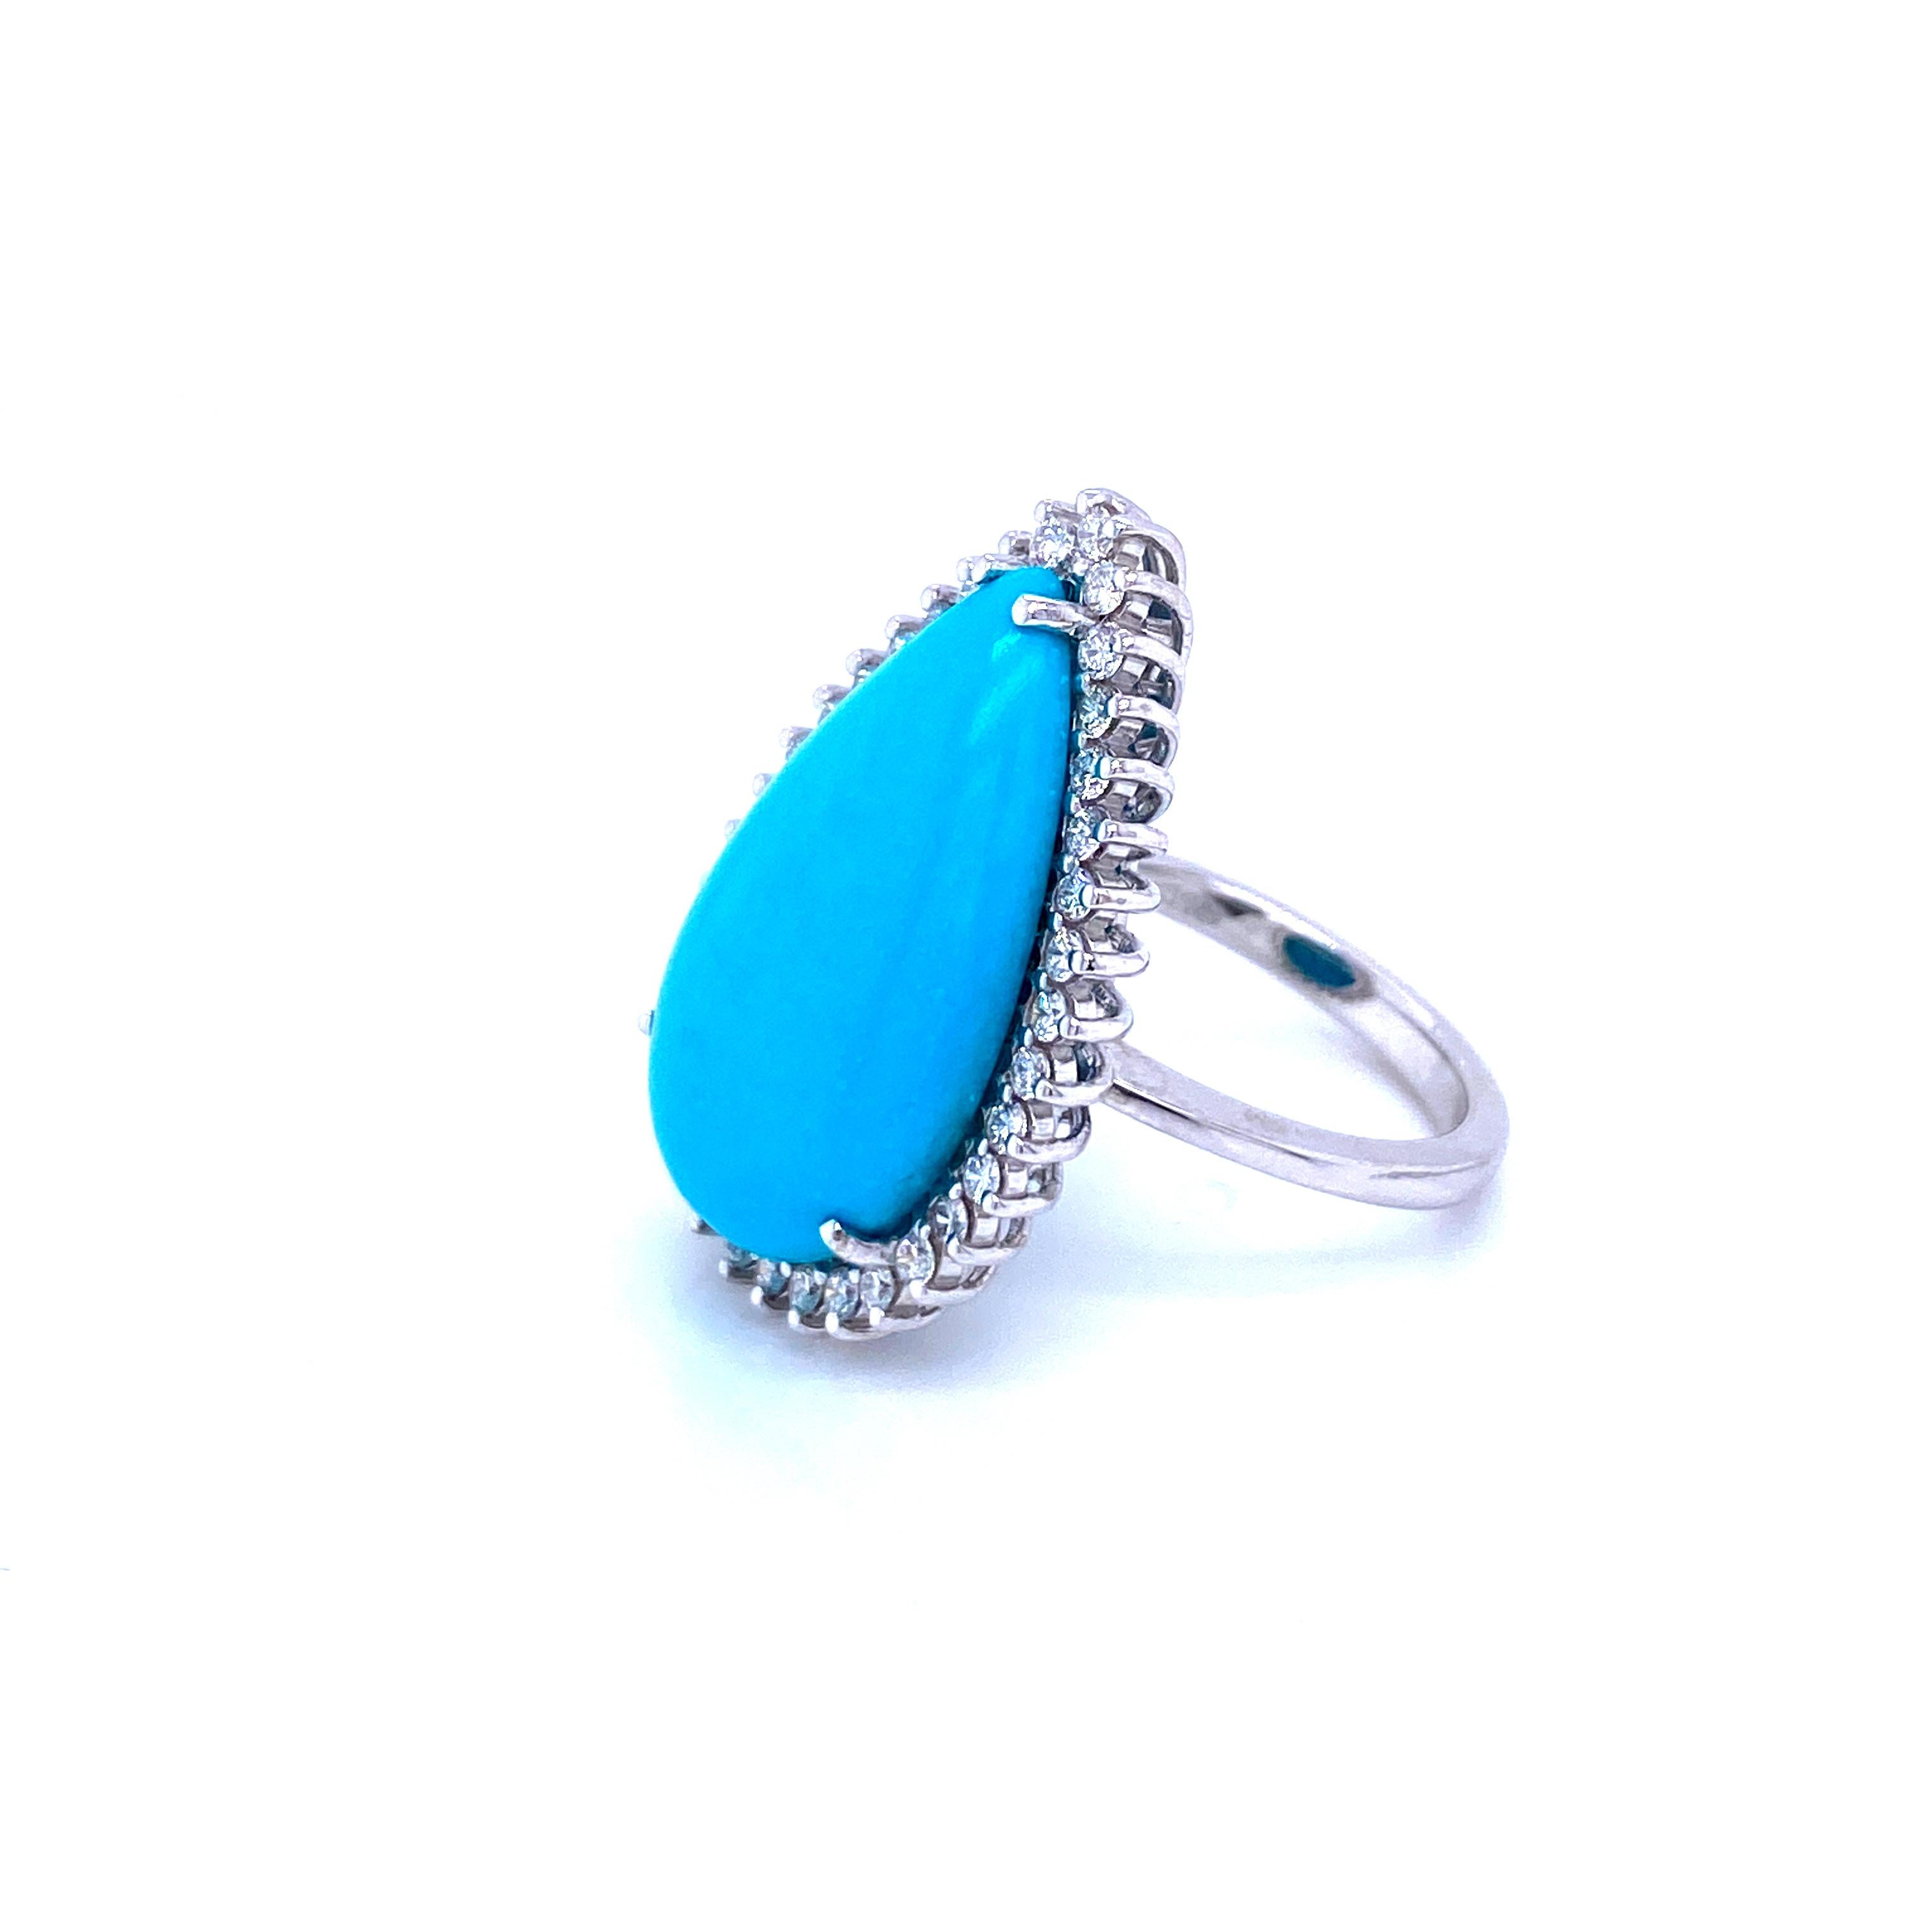 Cabochon Estate Natural Turquoise Diamond Gold Ring